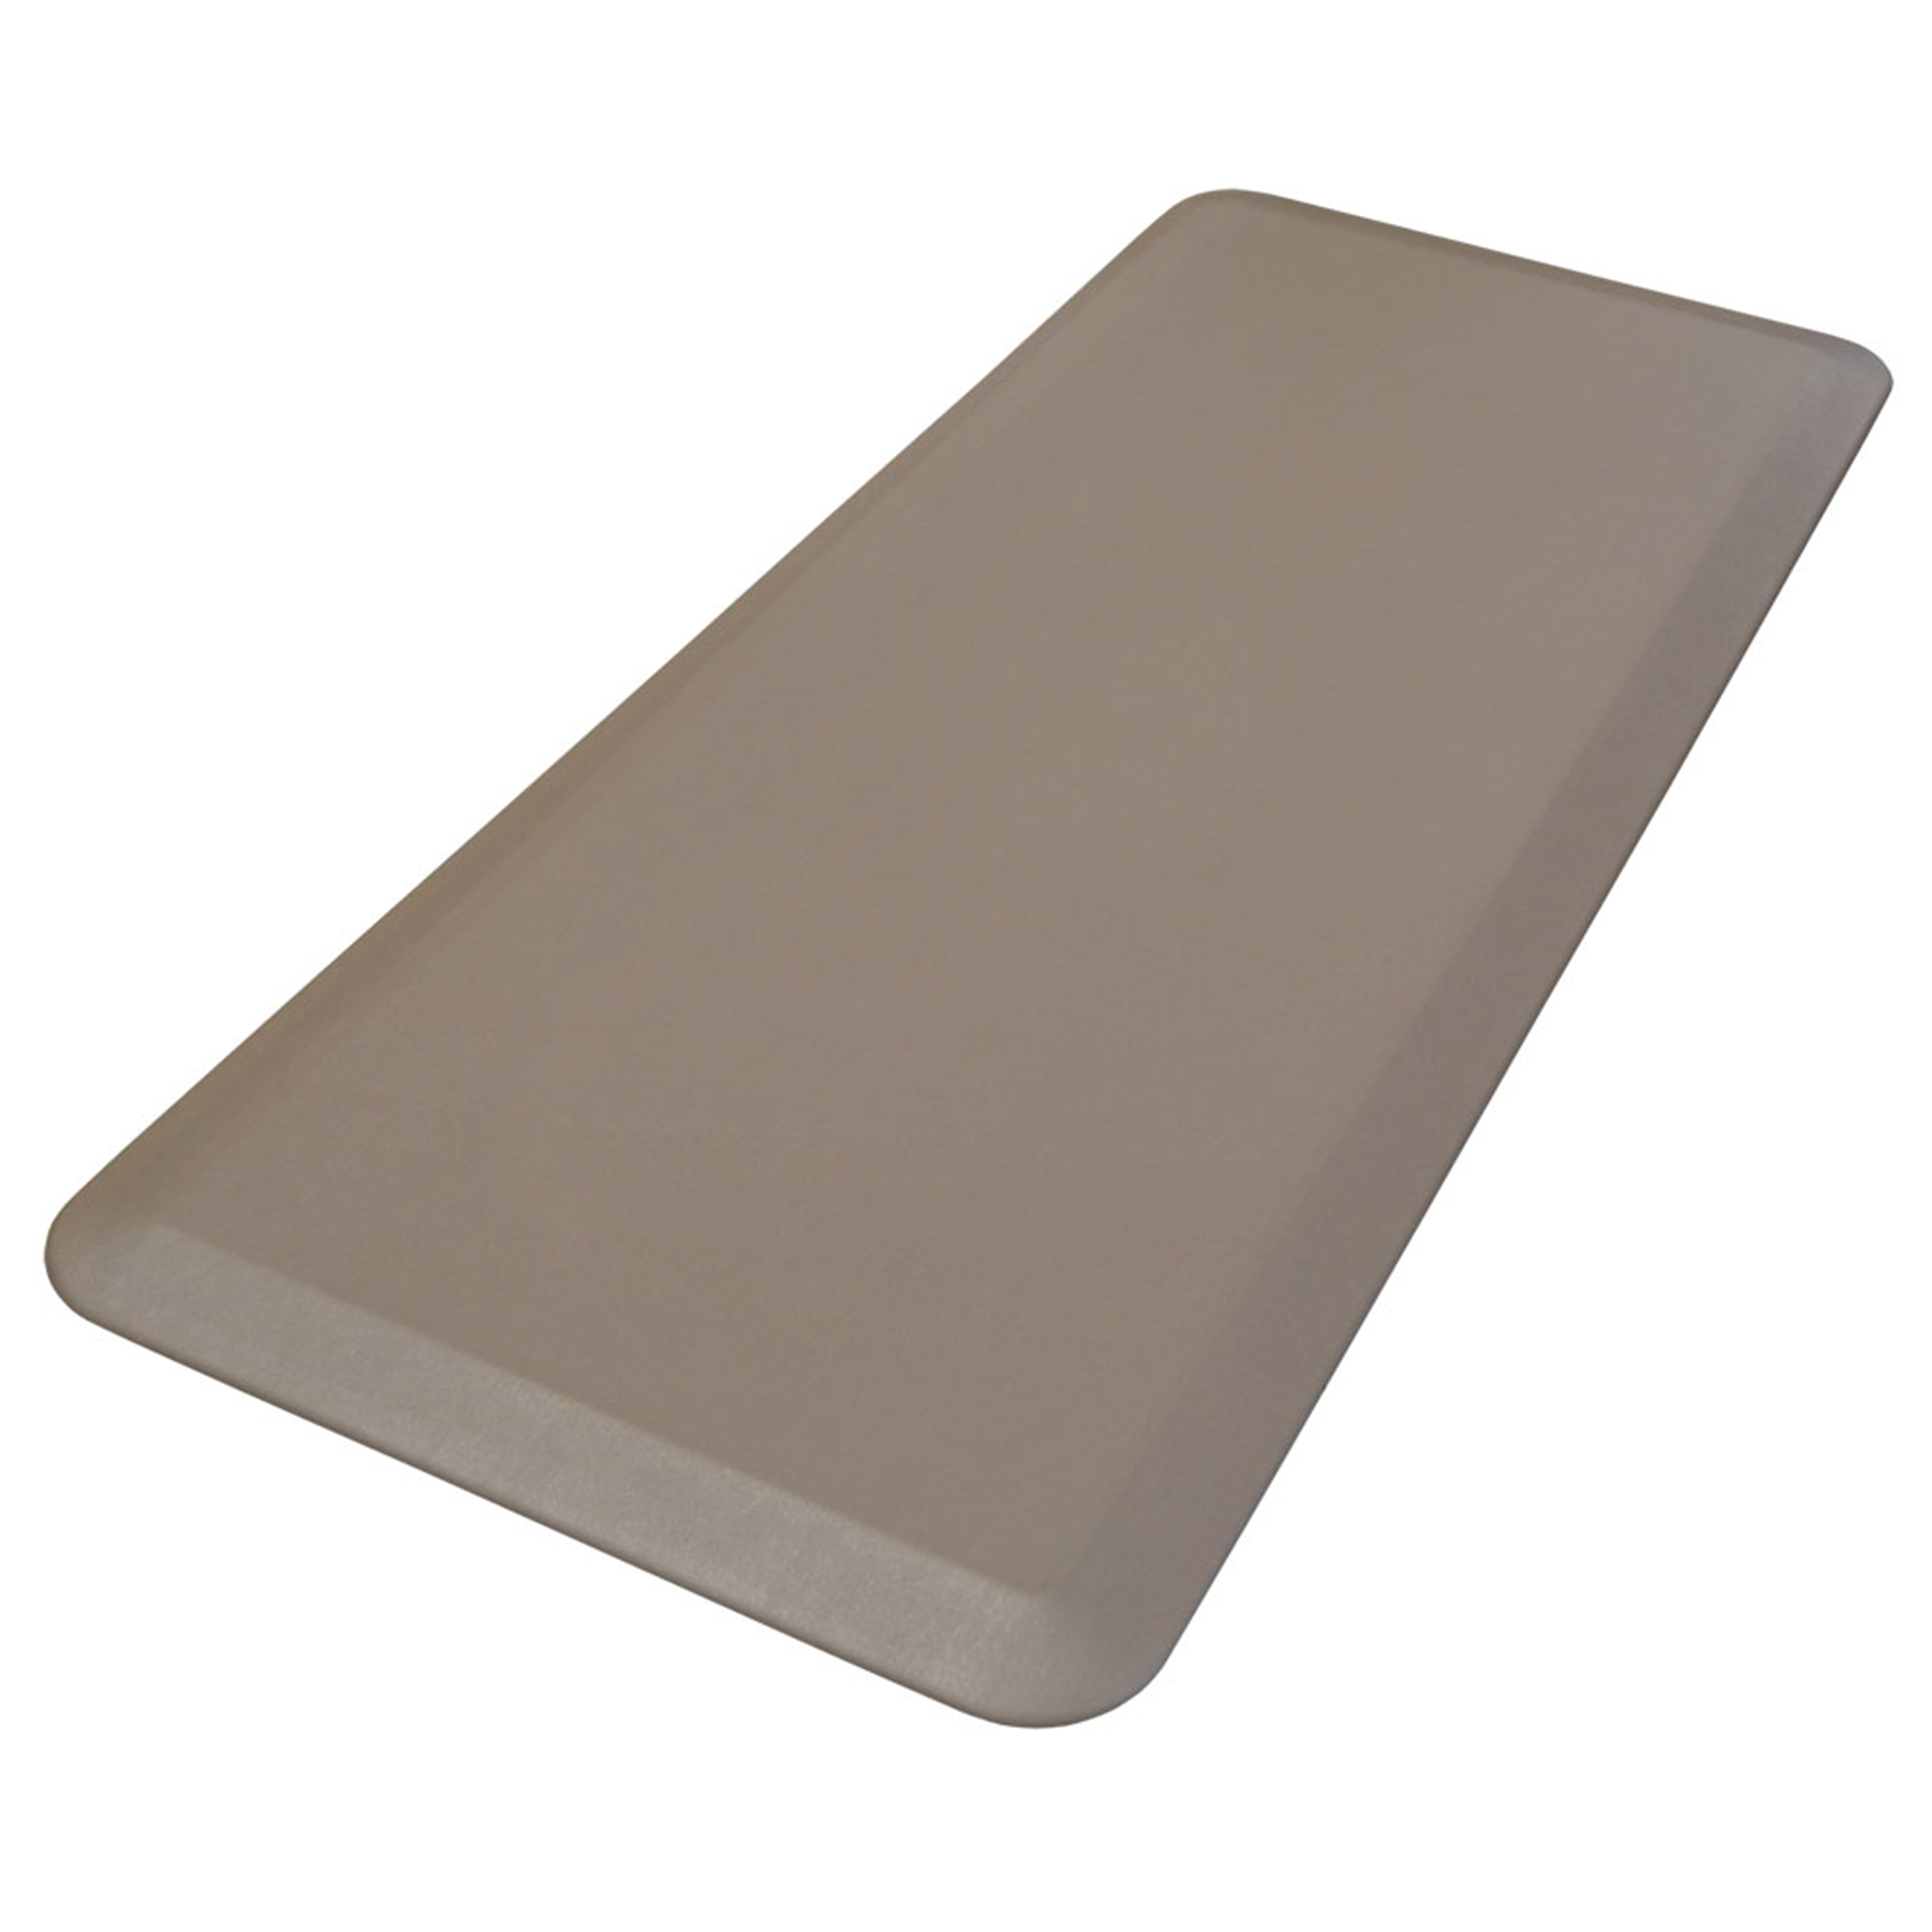 Eco-pro Commercial Mat, Taupe, 20" X 48"